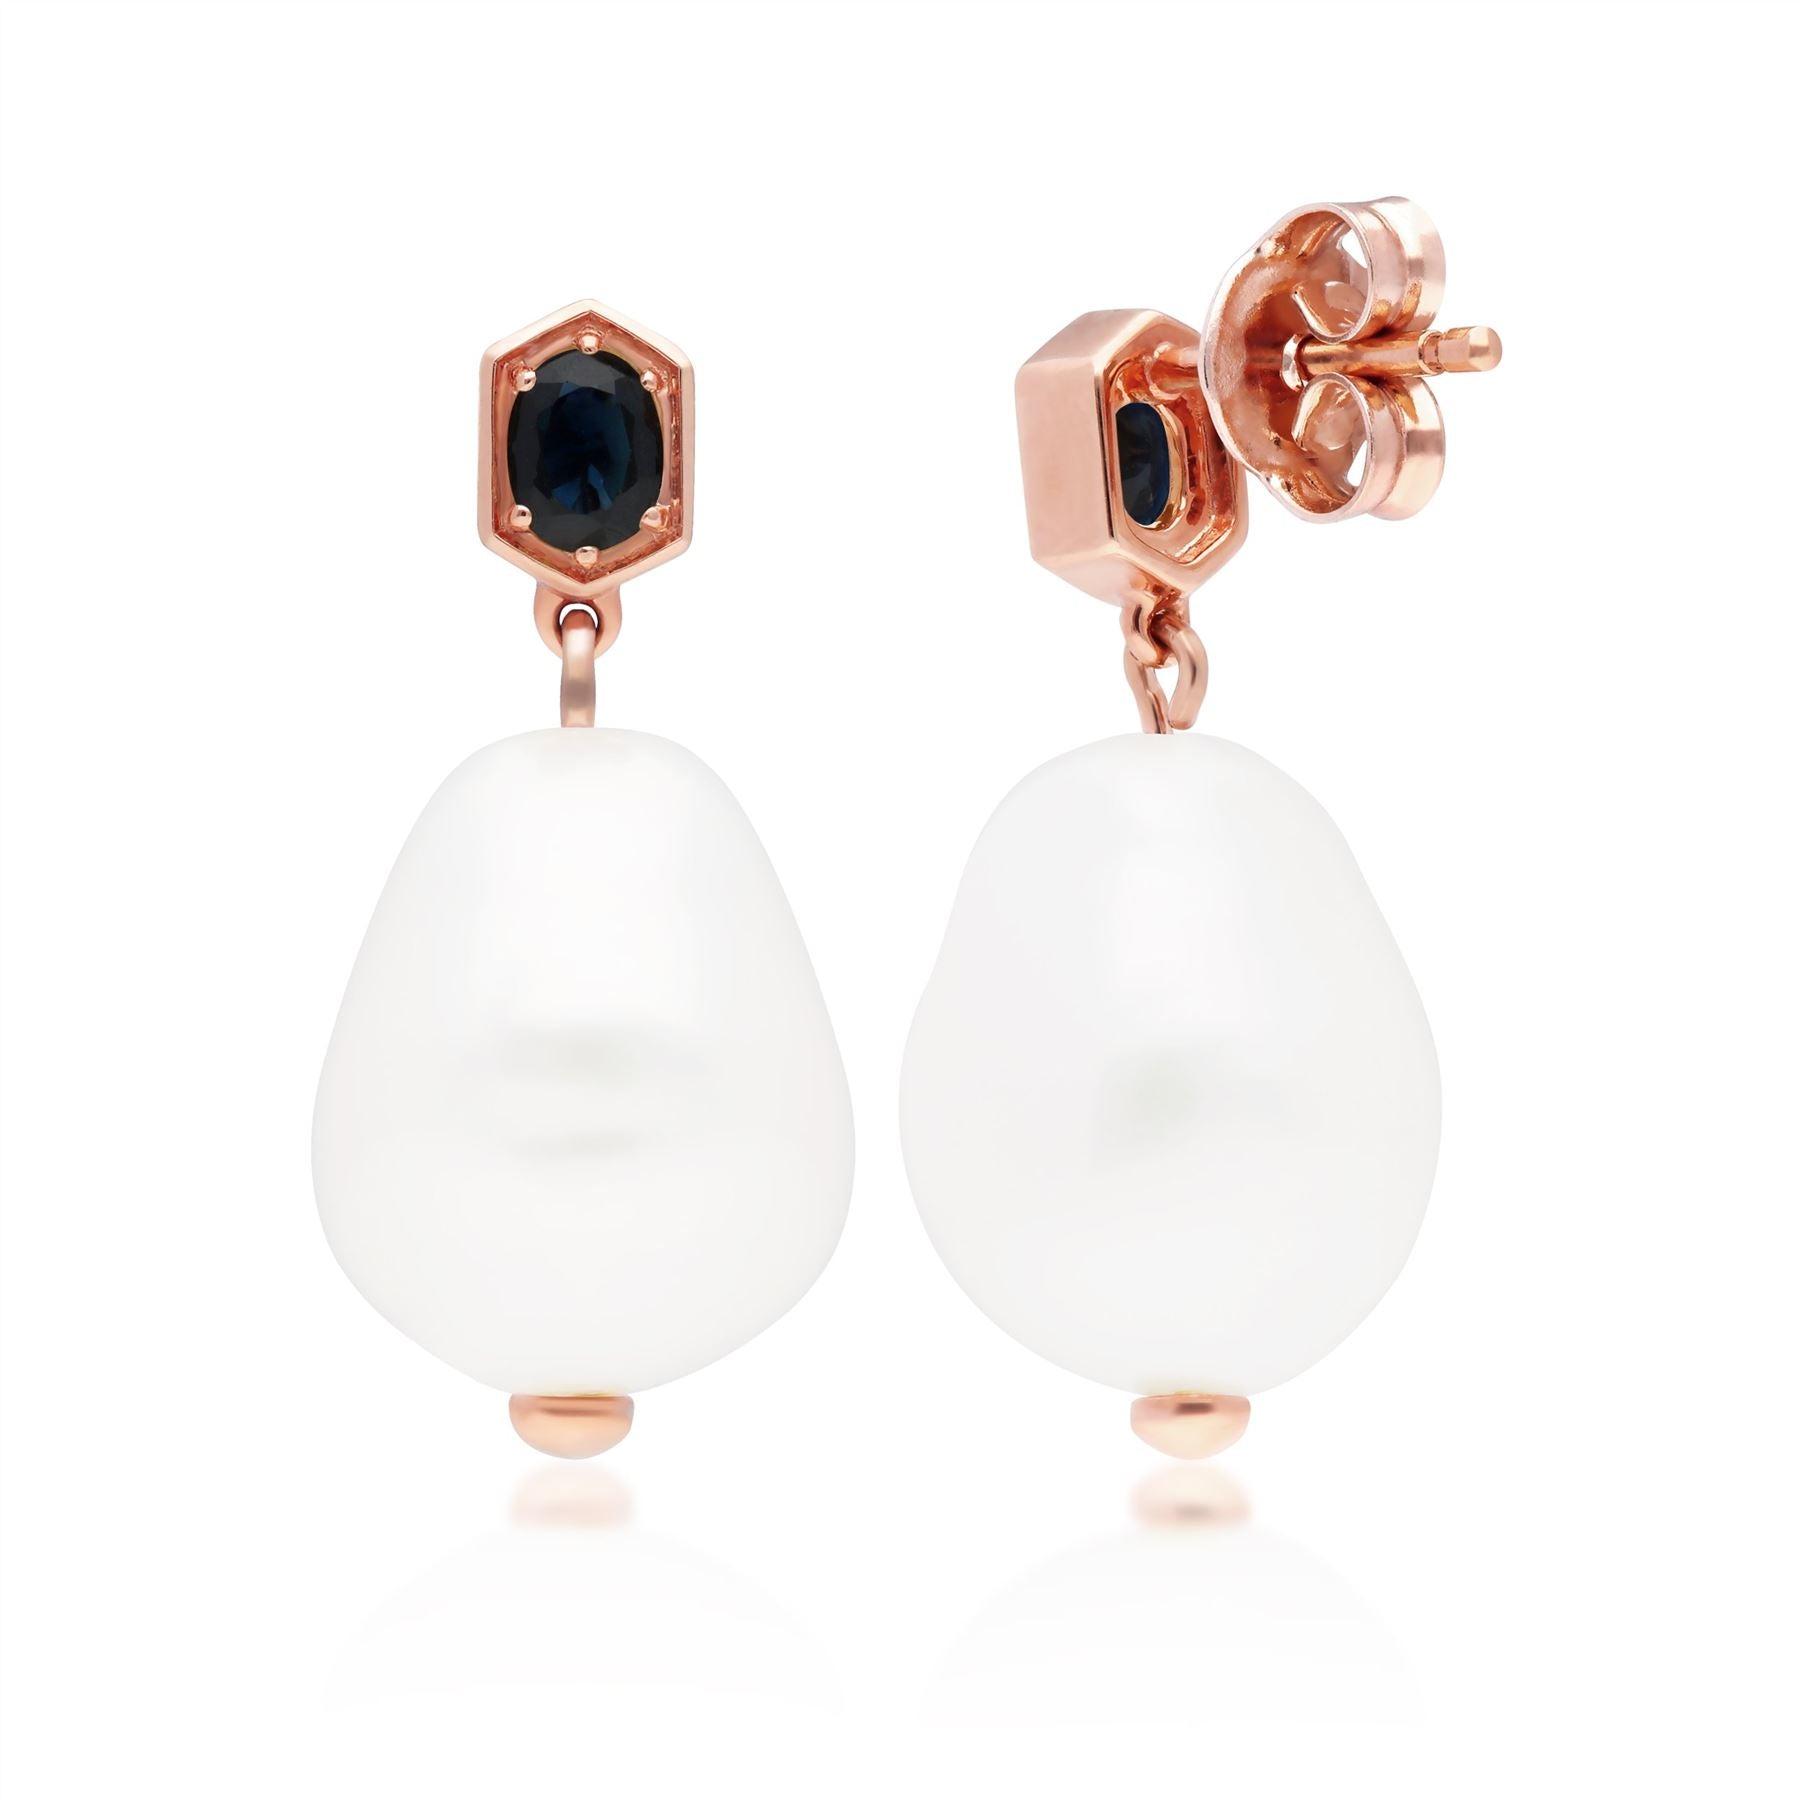 Modern Baroque Pearl & Sapphire Drop Earrings in Rose Gold Plated Sterling Silver